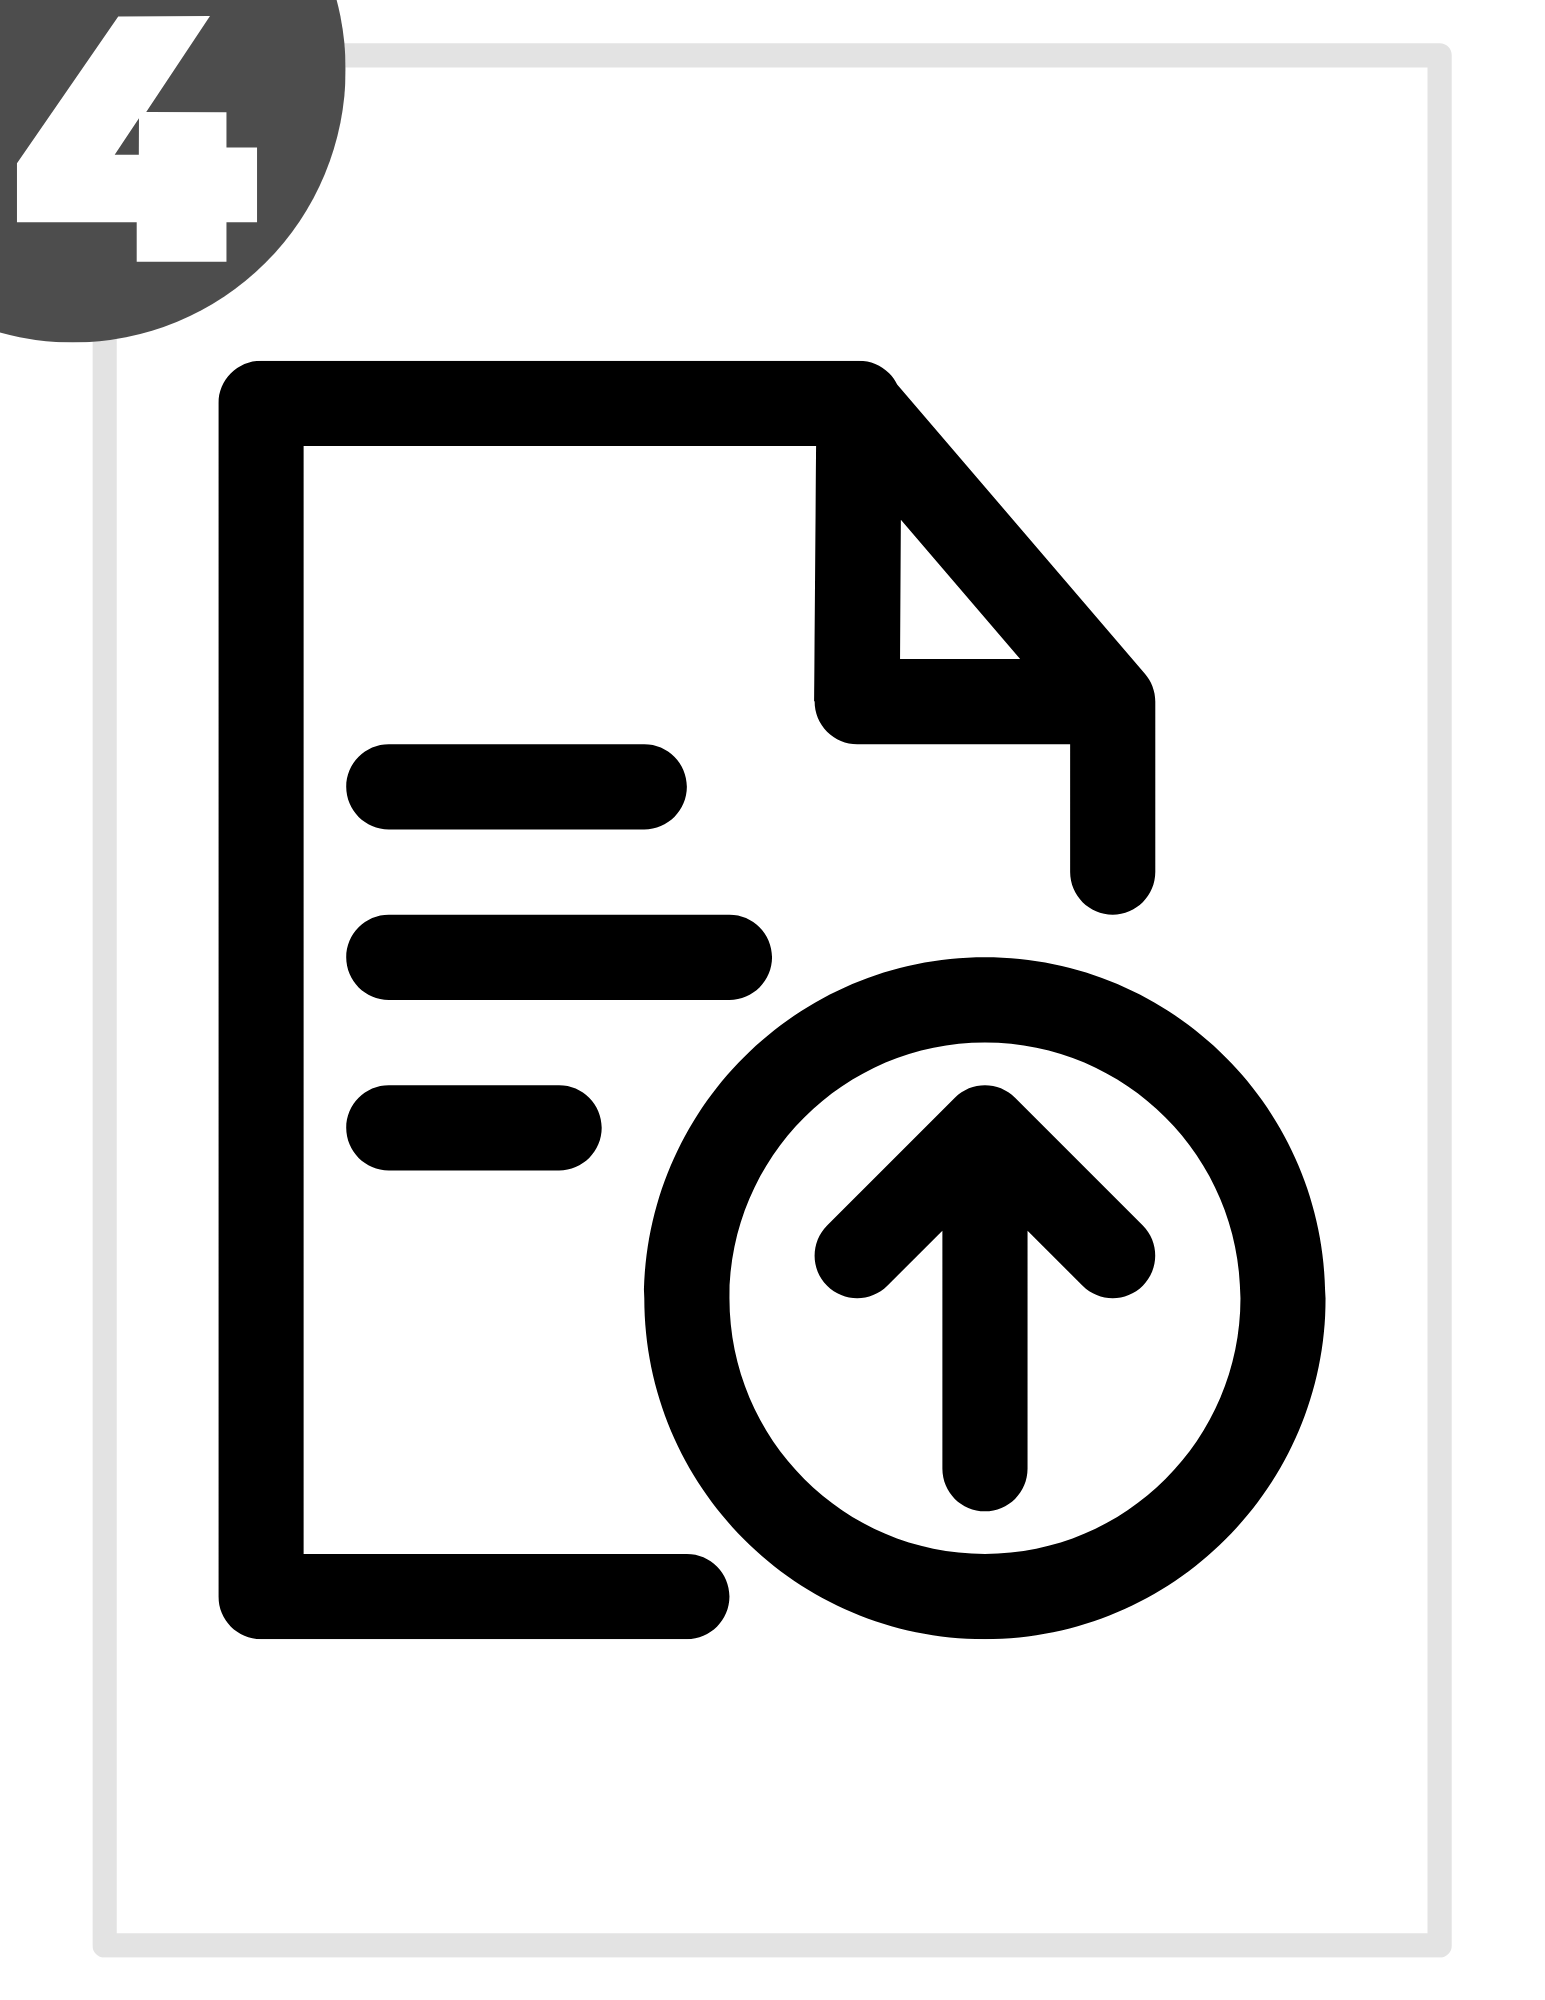 A black and white icon of a sheet of paper with an arrow pointing up.